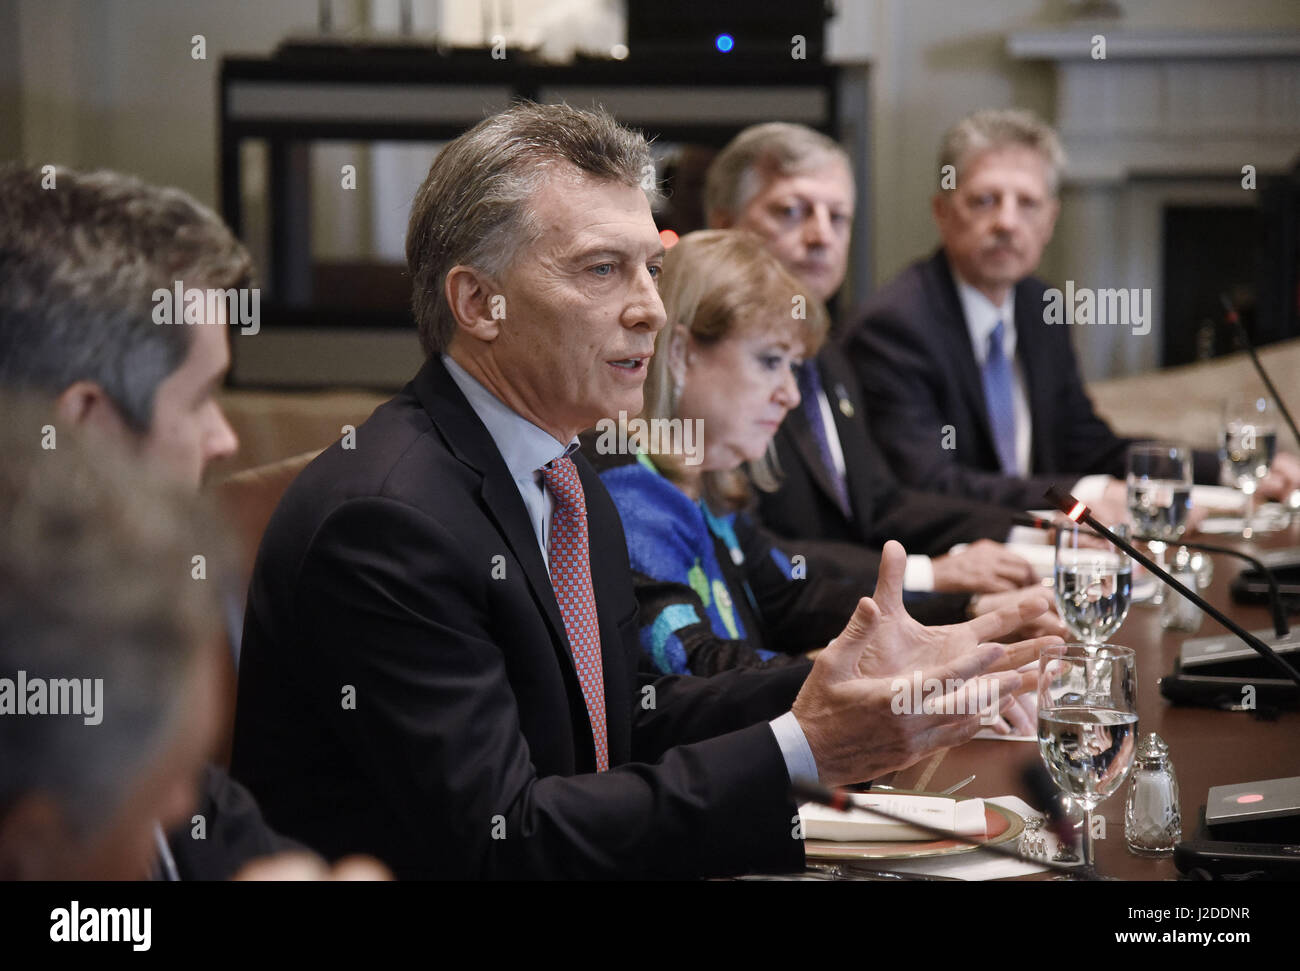 Washington, USA. 27th Apr, 2017. President Mauricio Macri of Argentina speaks during a working luncheon with President Trump in the Cabinet Room of the White House in Washington, DC, on April 27, 2017. Credit: MediaPunch Inc/Alamy Live News Stock Photo